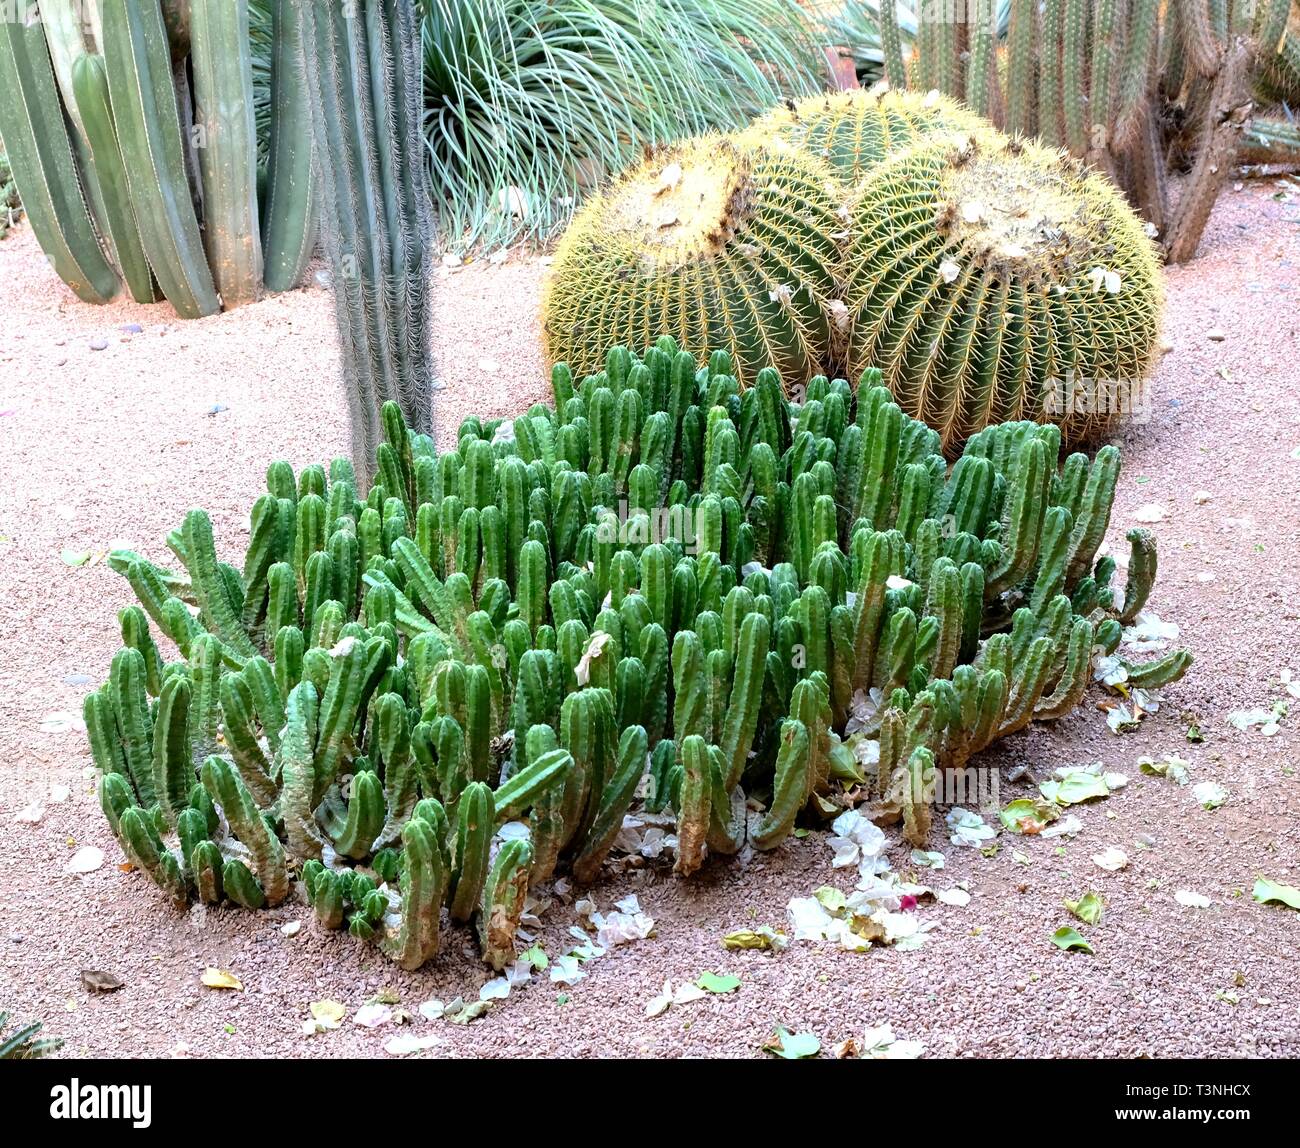 A cactus is a member of the plant family Cactaceae,a family comprising  about 127 genera with some 1750 known species of the order Caryophyllales  Stock Photo - Alamy